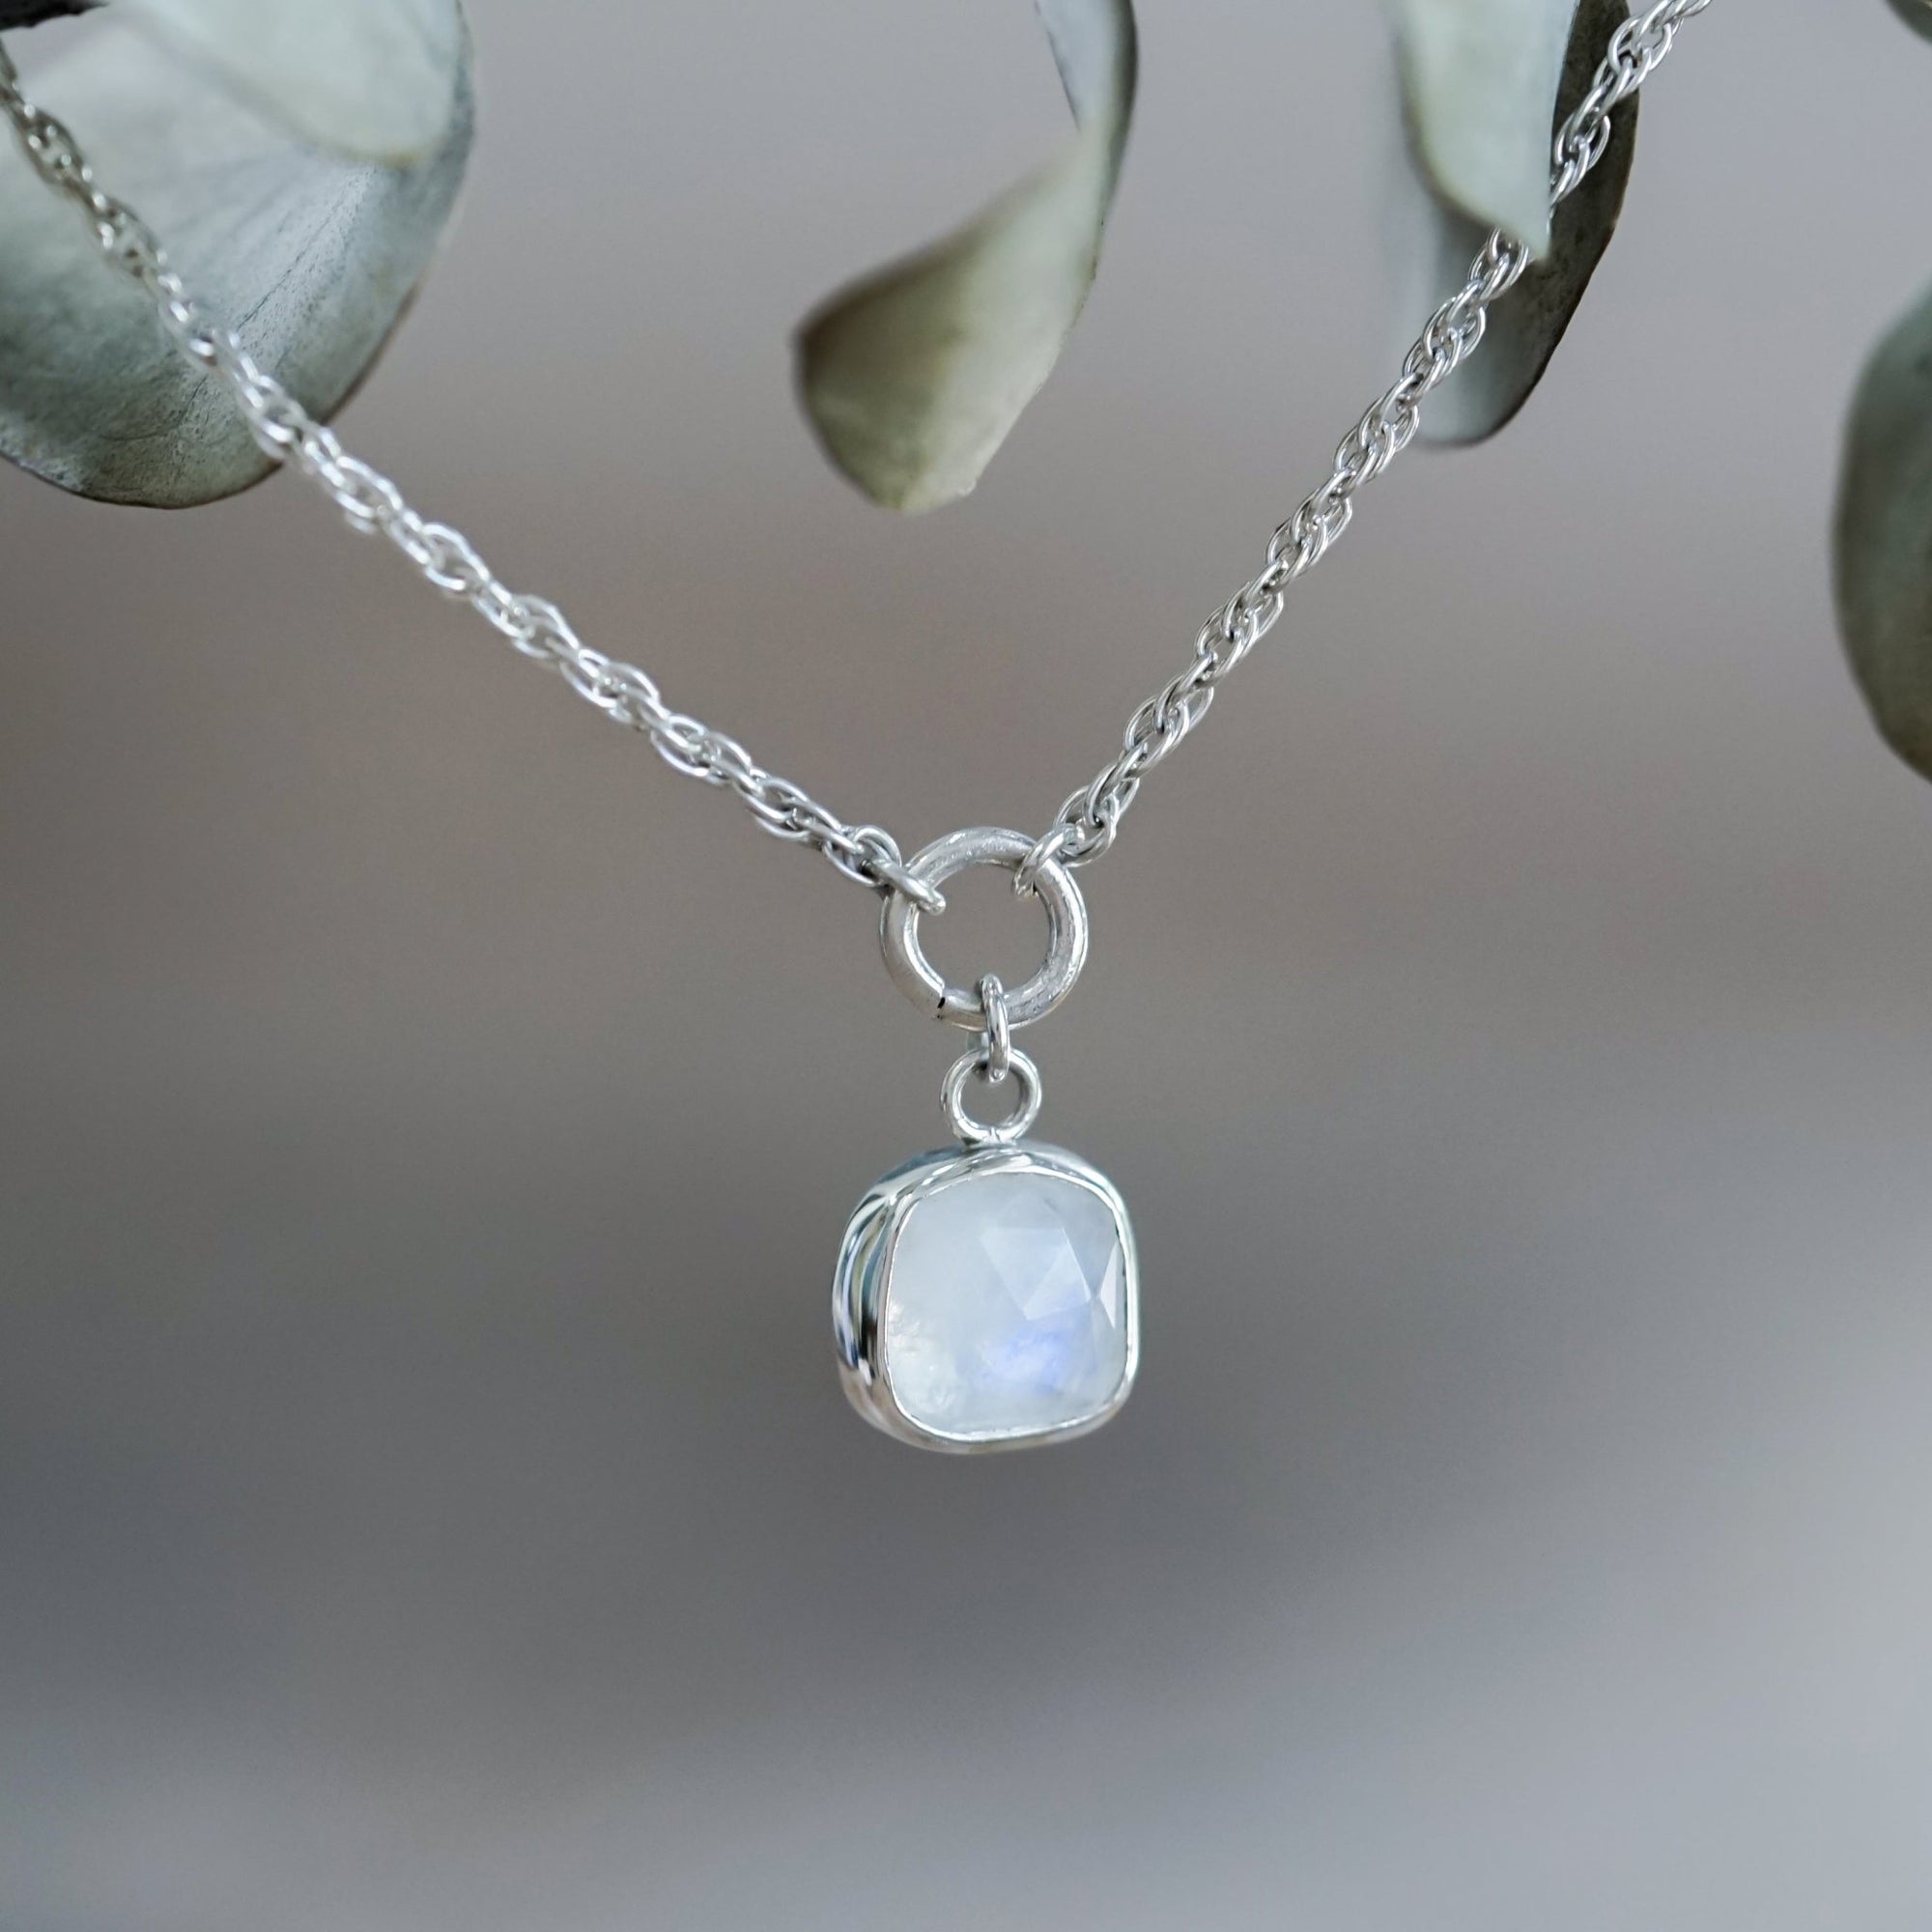 Rose Cut Moonstone Bracelet - Gardens of the Sun | Ethical Jewelry